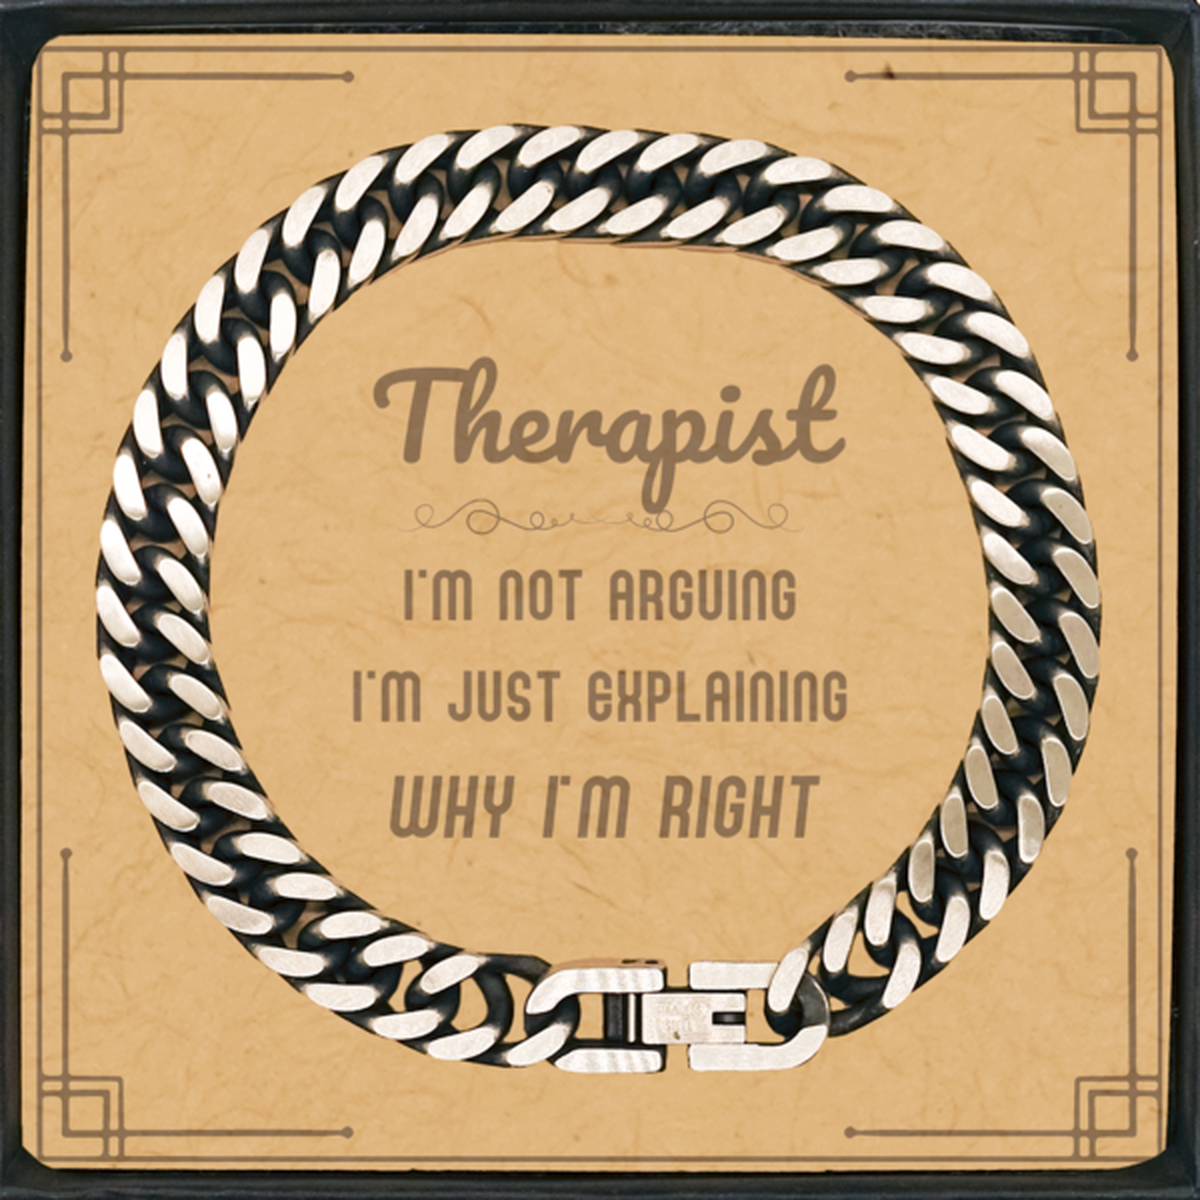 Therapist I'm not Arguing. I'm Just Explaining Why I'm RIGHT Cuban Link Chain Bracelet, Funny Saying Quote Therapist Gifts For Therapist Message Card Graduation Birthday Christmas Gifts for Men Women Coworker